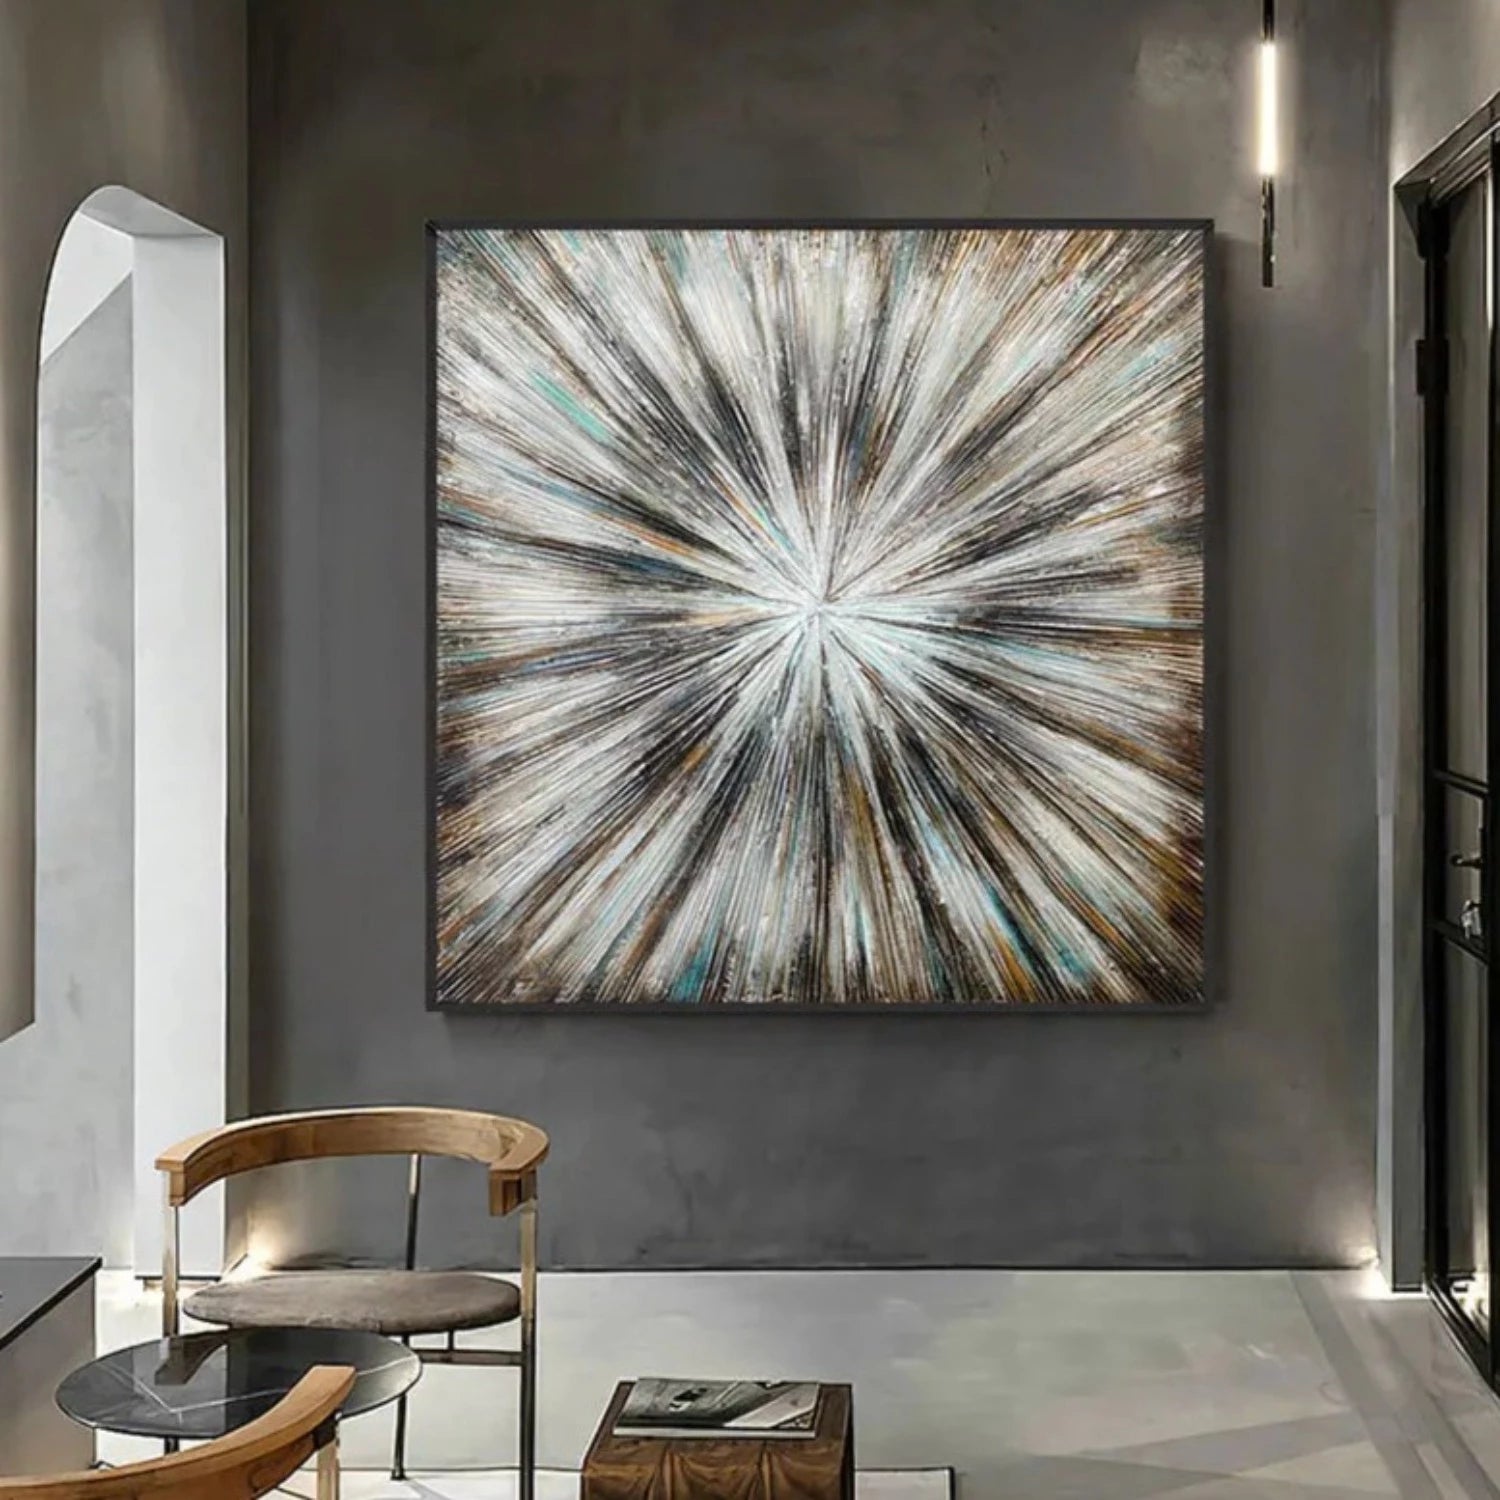 Nordic-Style Starburst Abstract Textured Painting